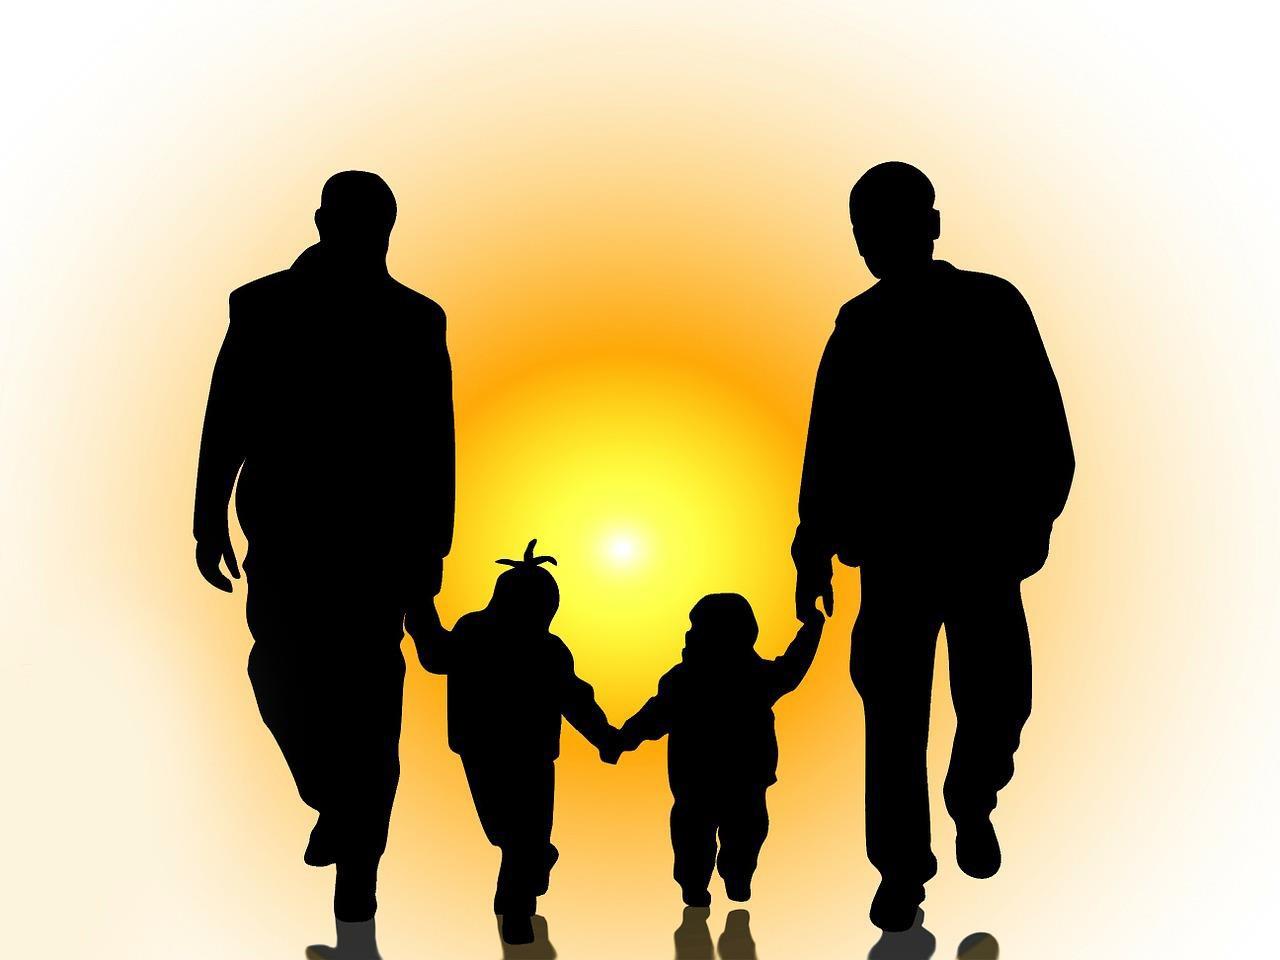 A drawing of family holding hands. The dads are on each side and the kids are in the middle.